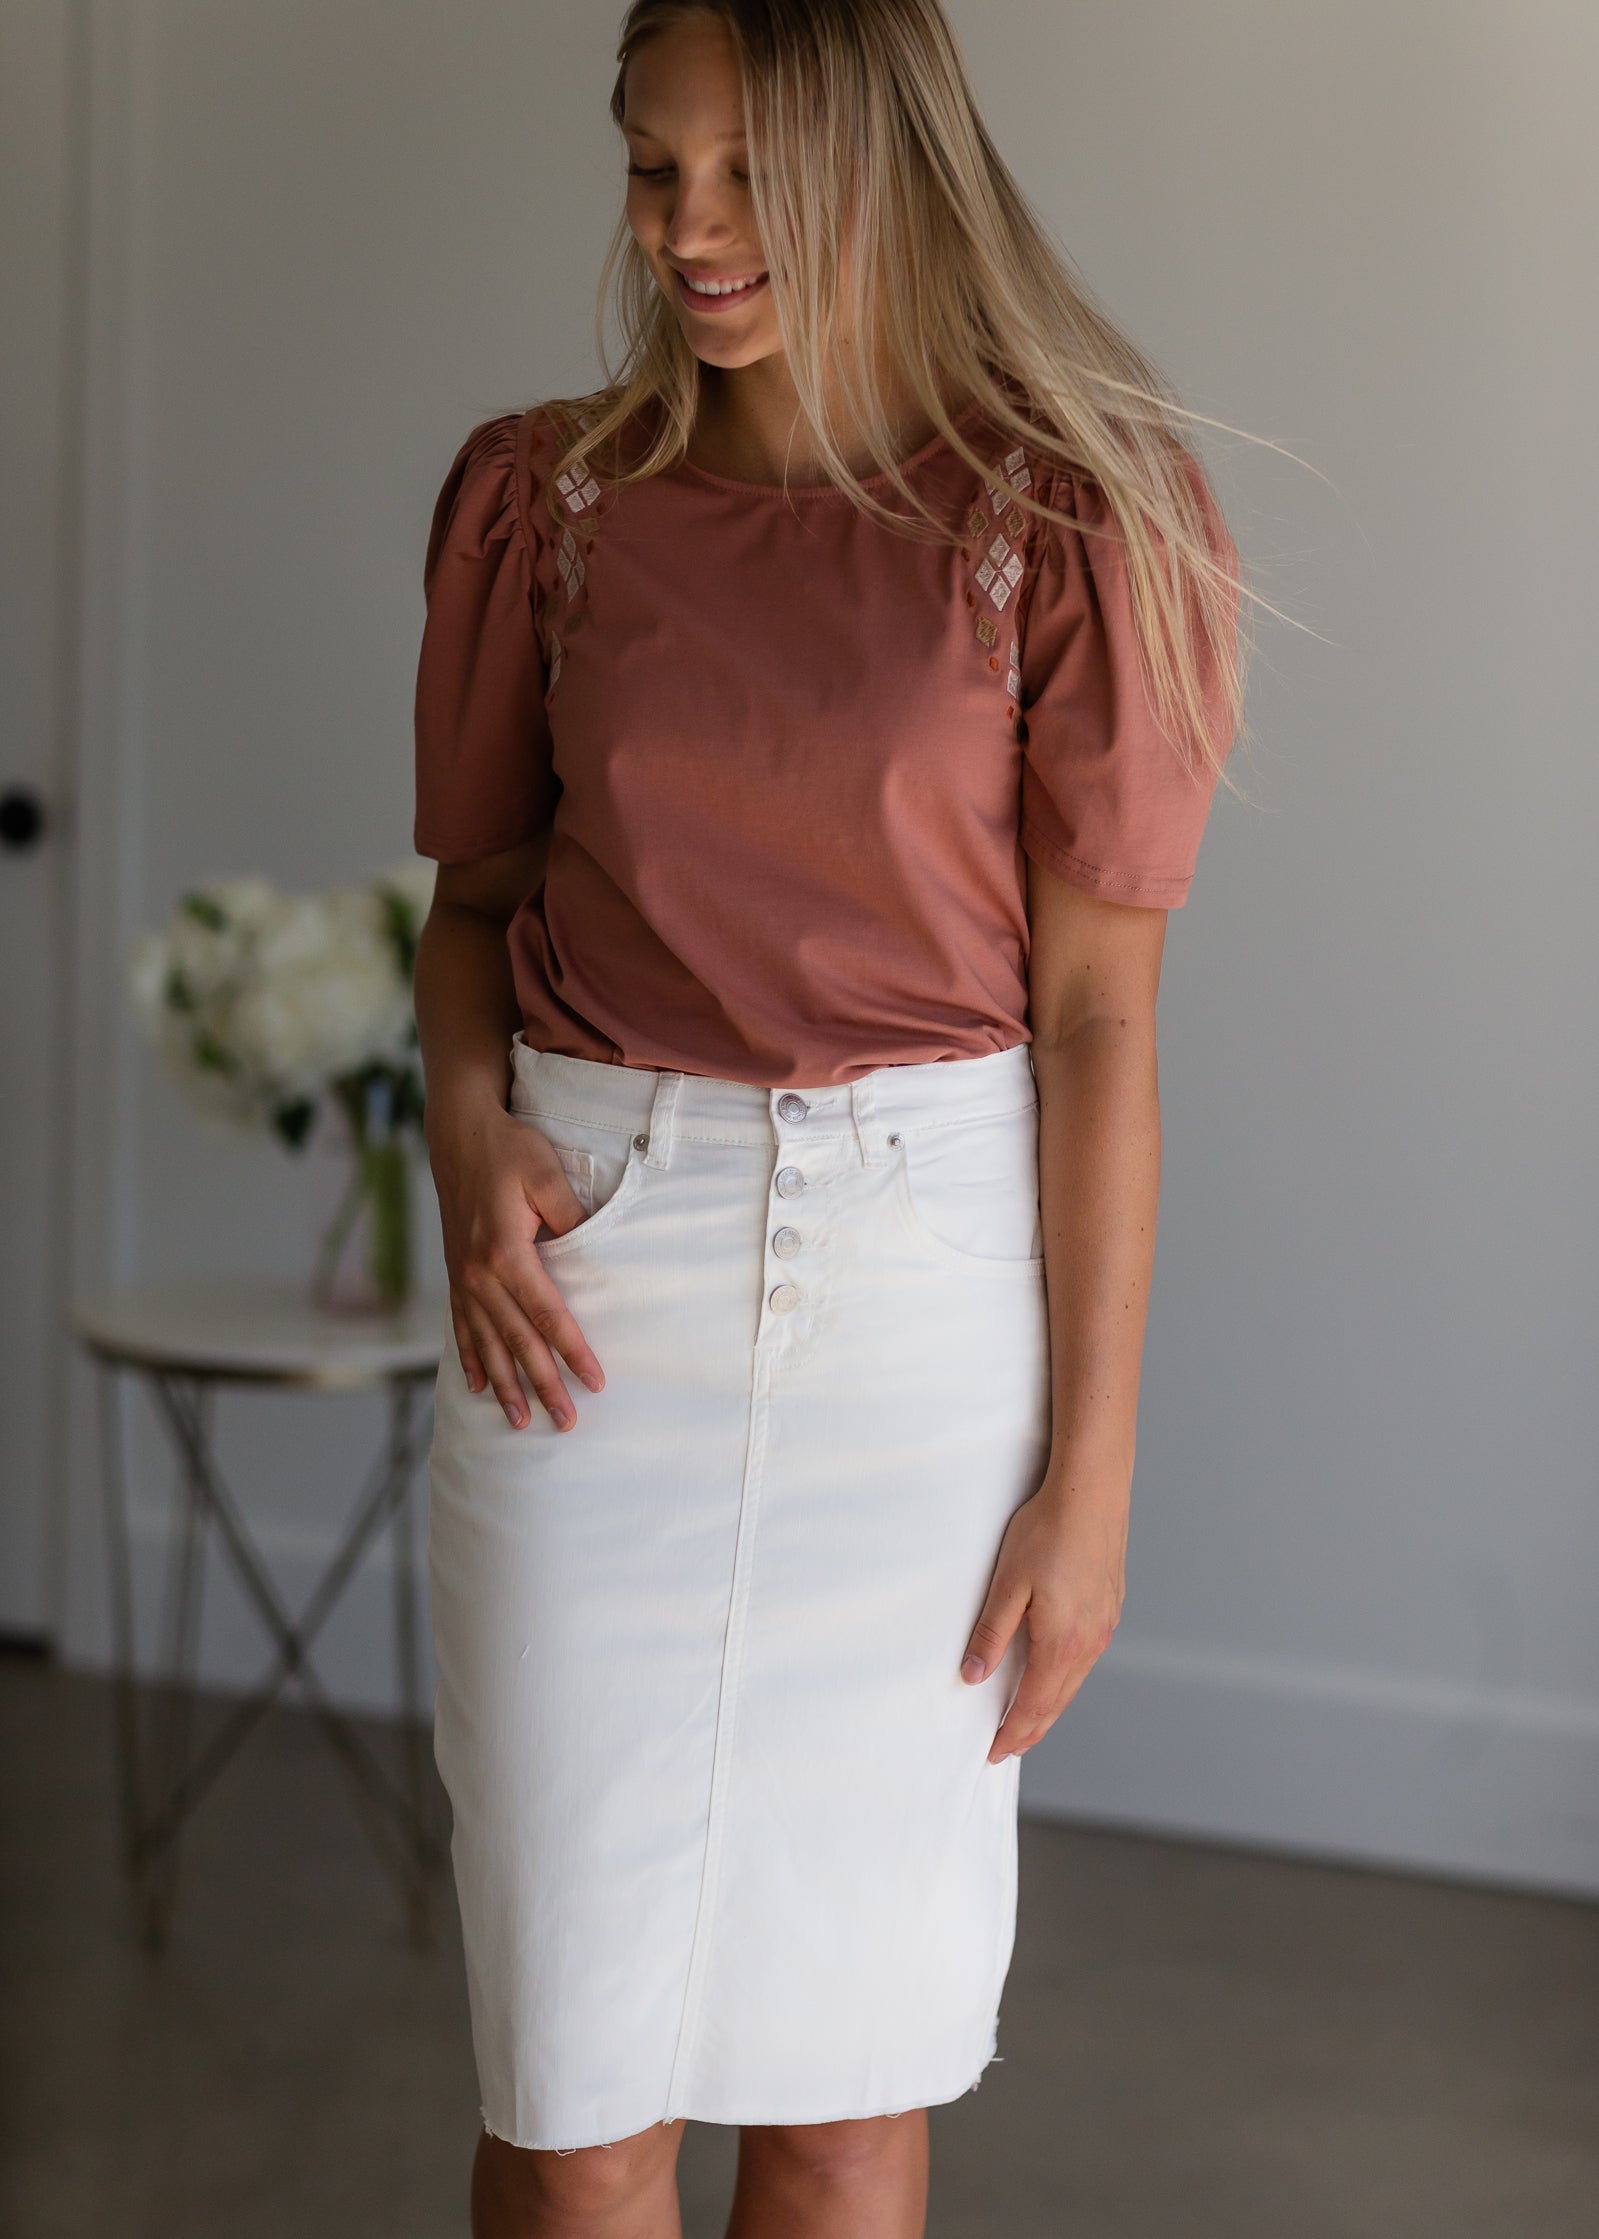 Terracotta Puff Sleeve Embroidered Top - FINAL SALE Tops